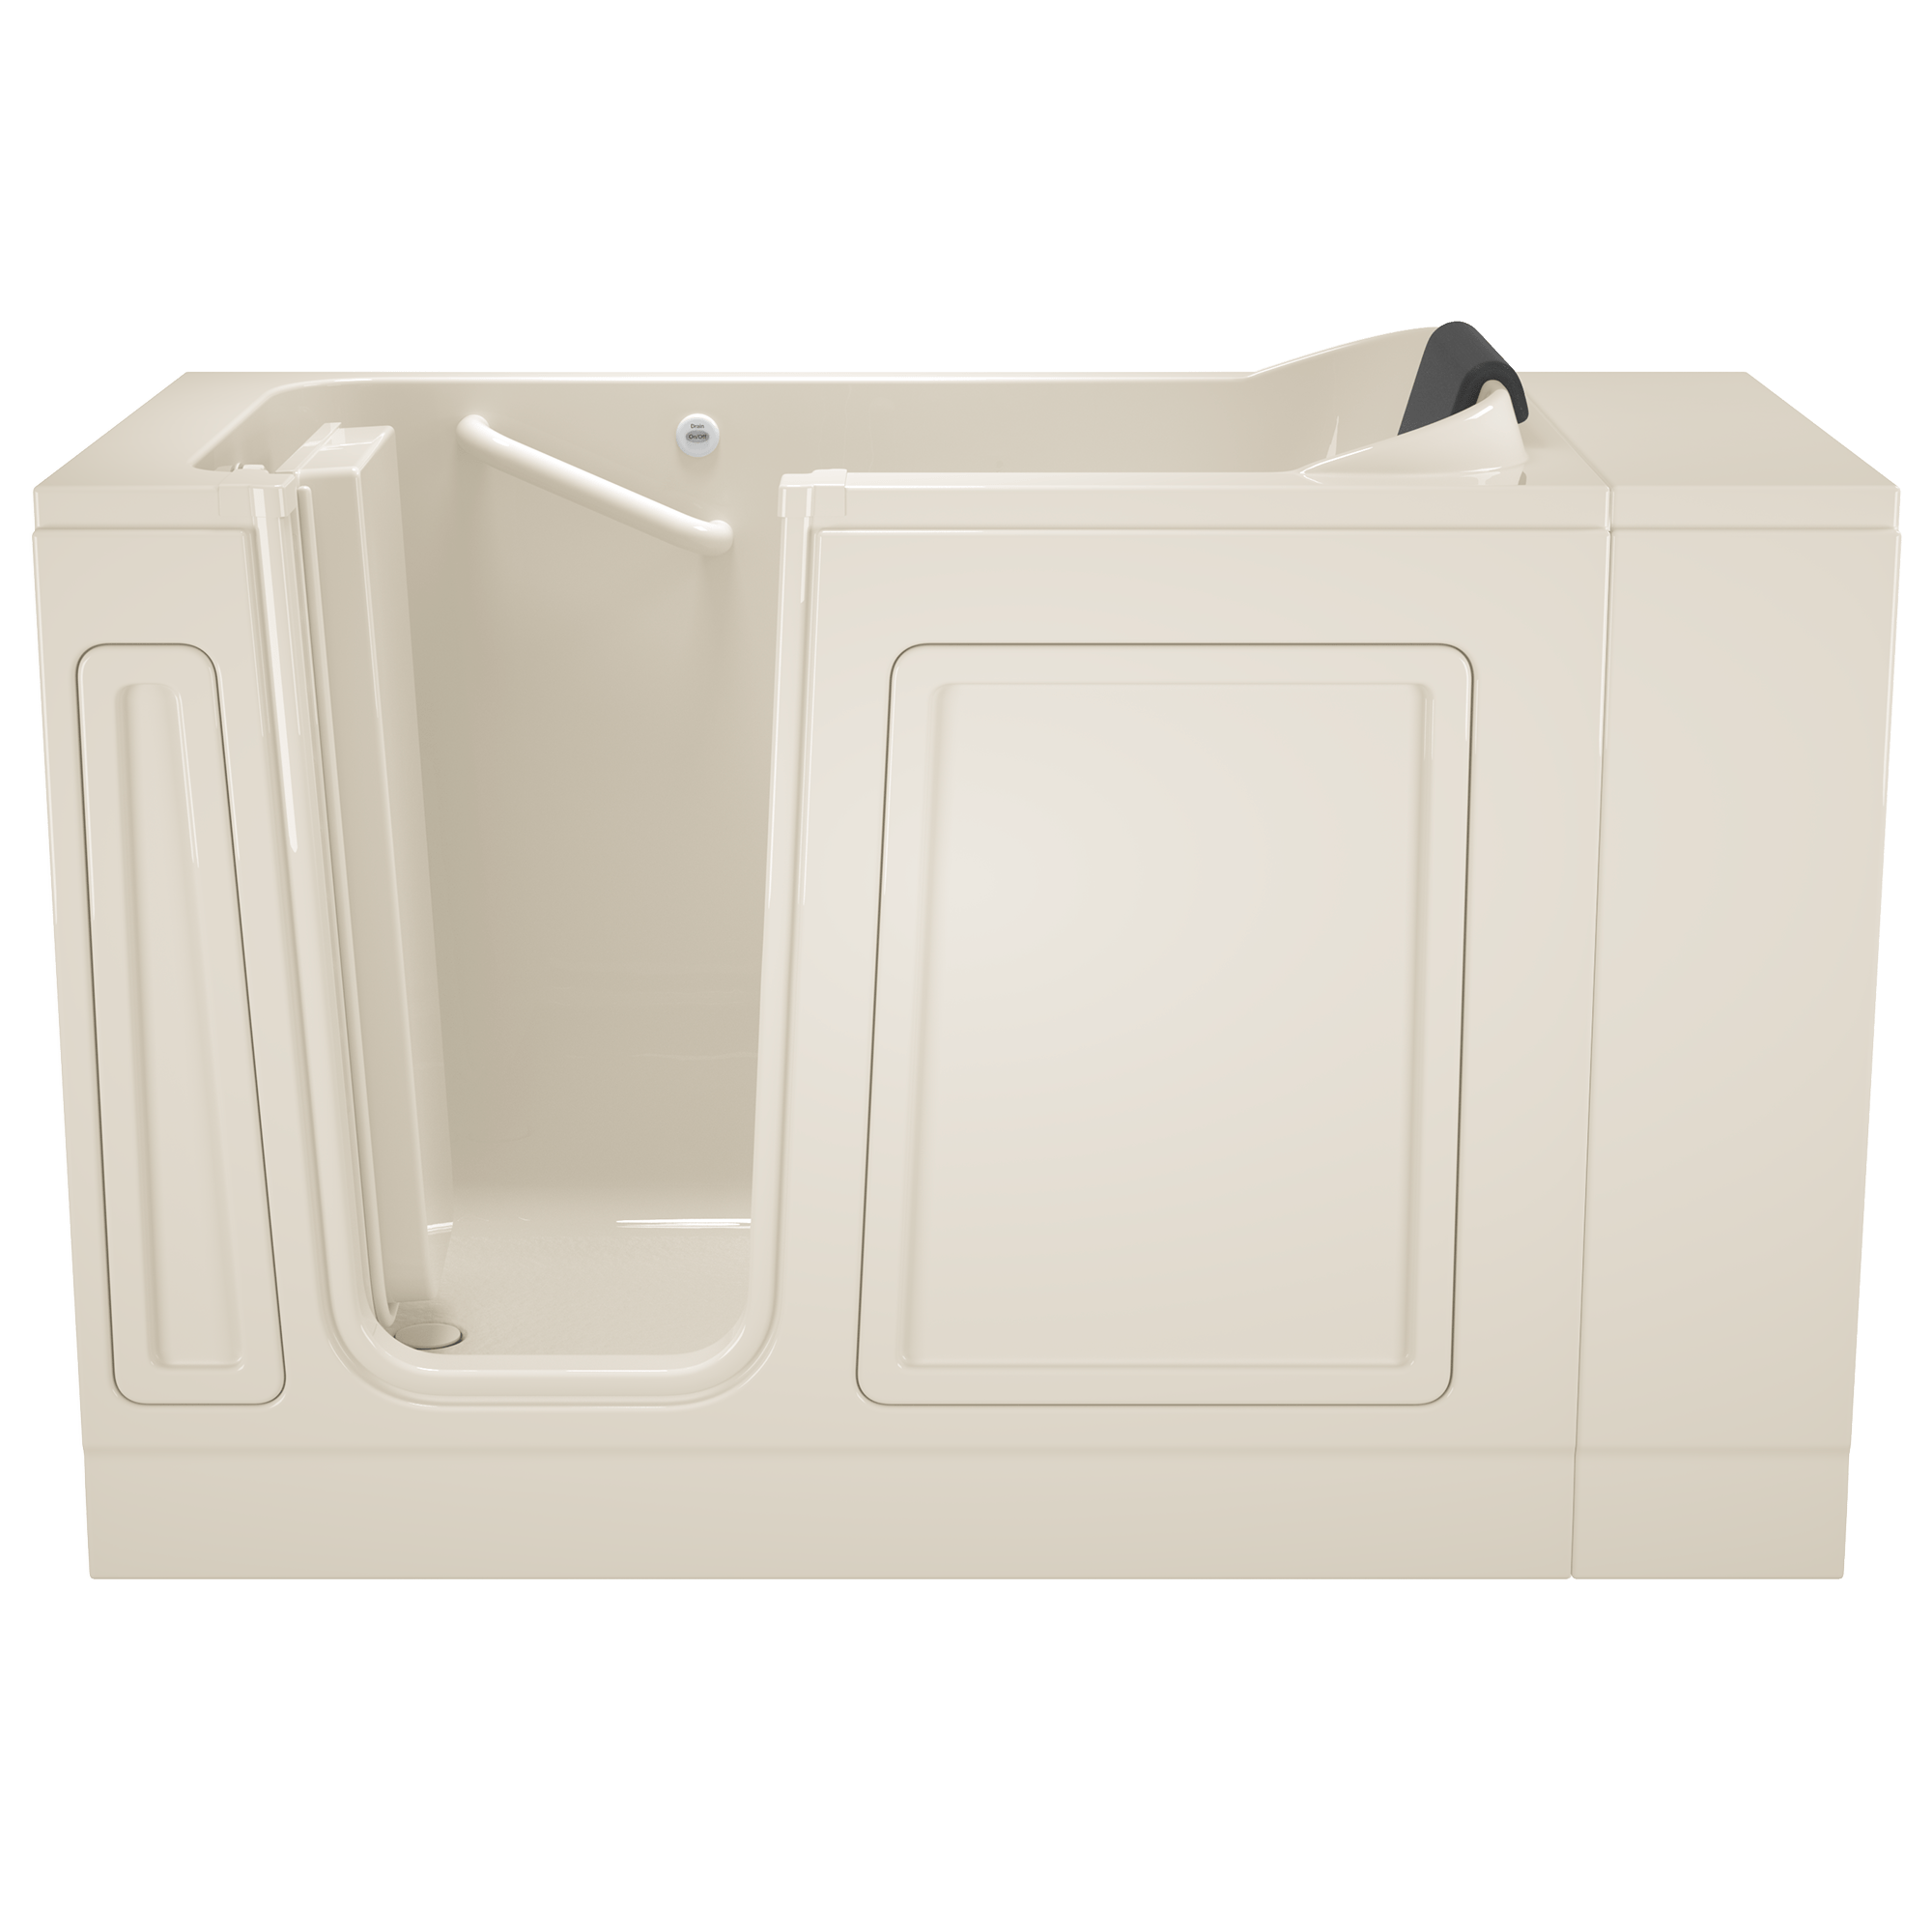 Acrylic Luxury Series 28 x 48 Inch Walk in Tub With Soaker System   Left Hand Drain WIB LINEN